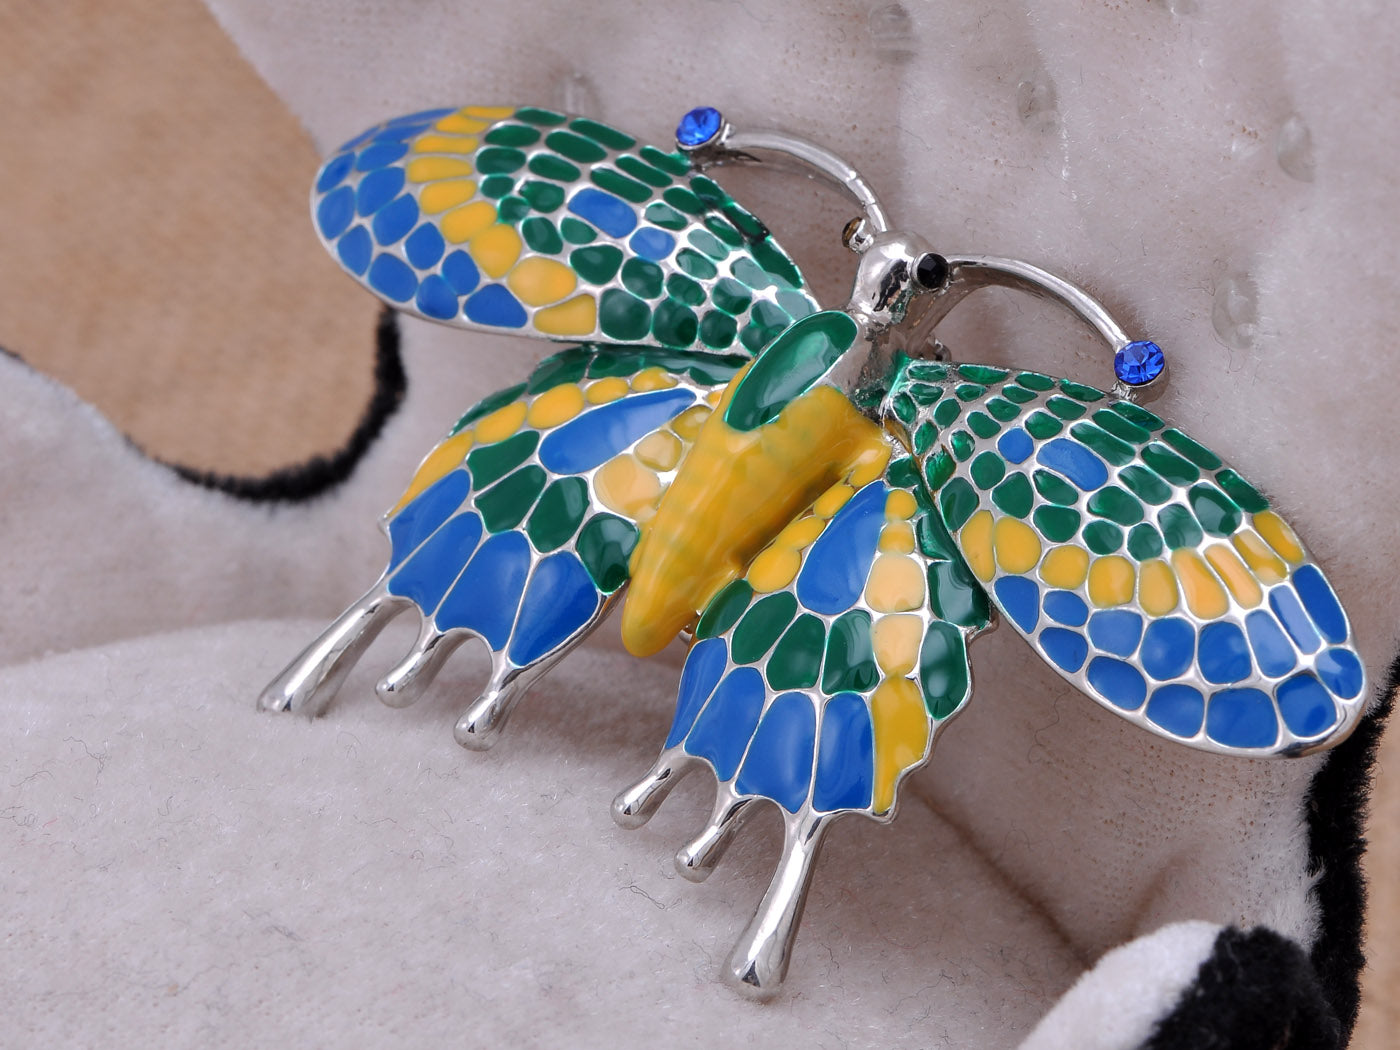 Capri Blue Enamel Painted Butterfly Insect Brooch Jewelry Pin